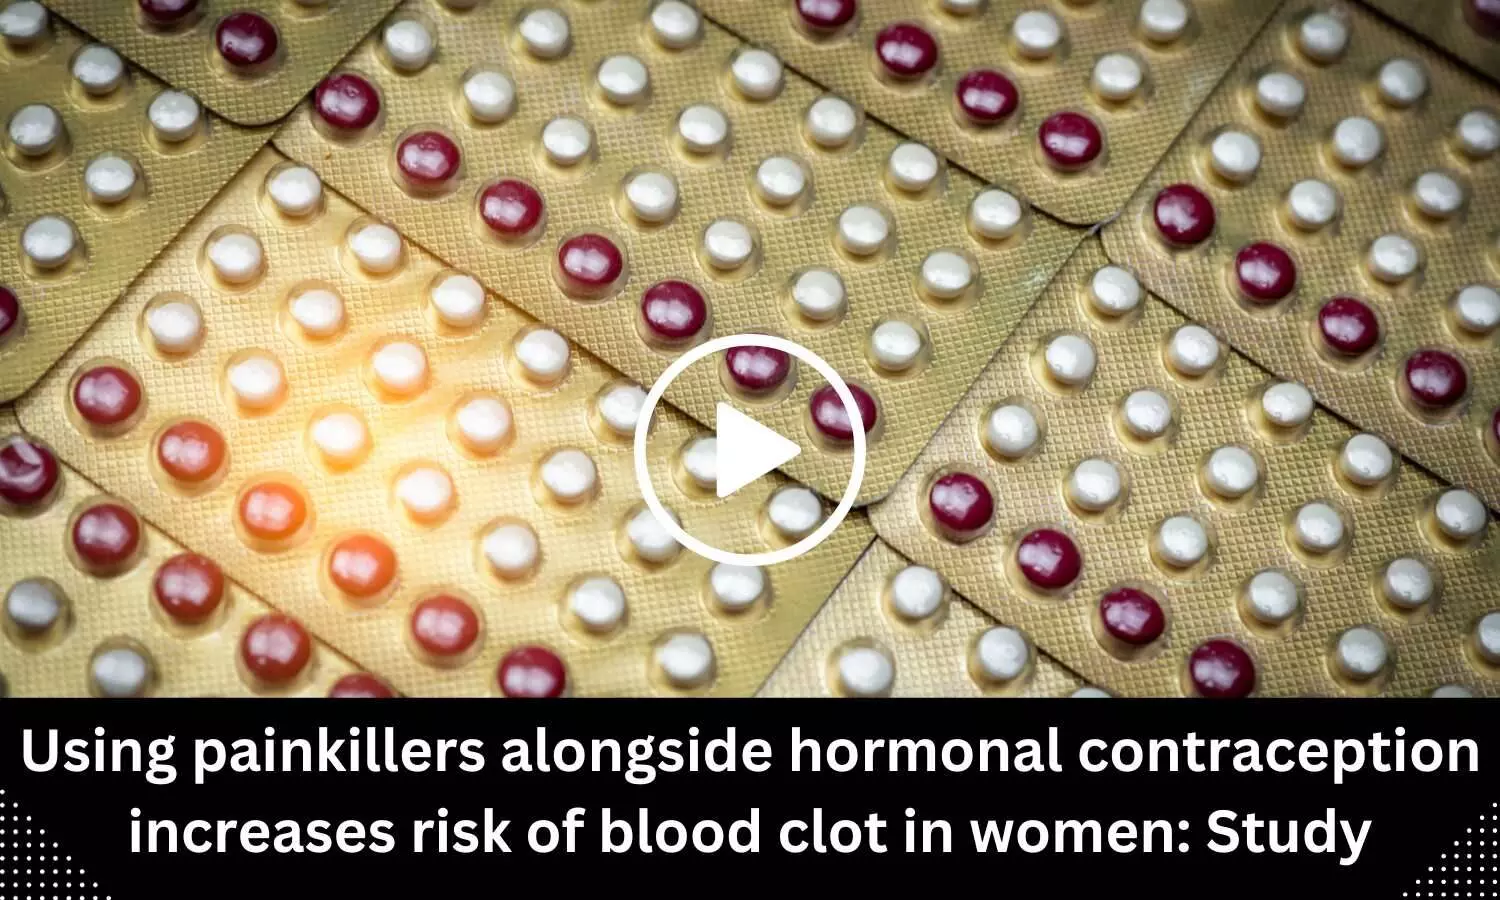 Using painkillers alongside hormonal contraception increases risk of blood clot in women: Study